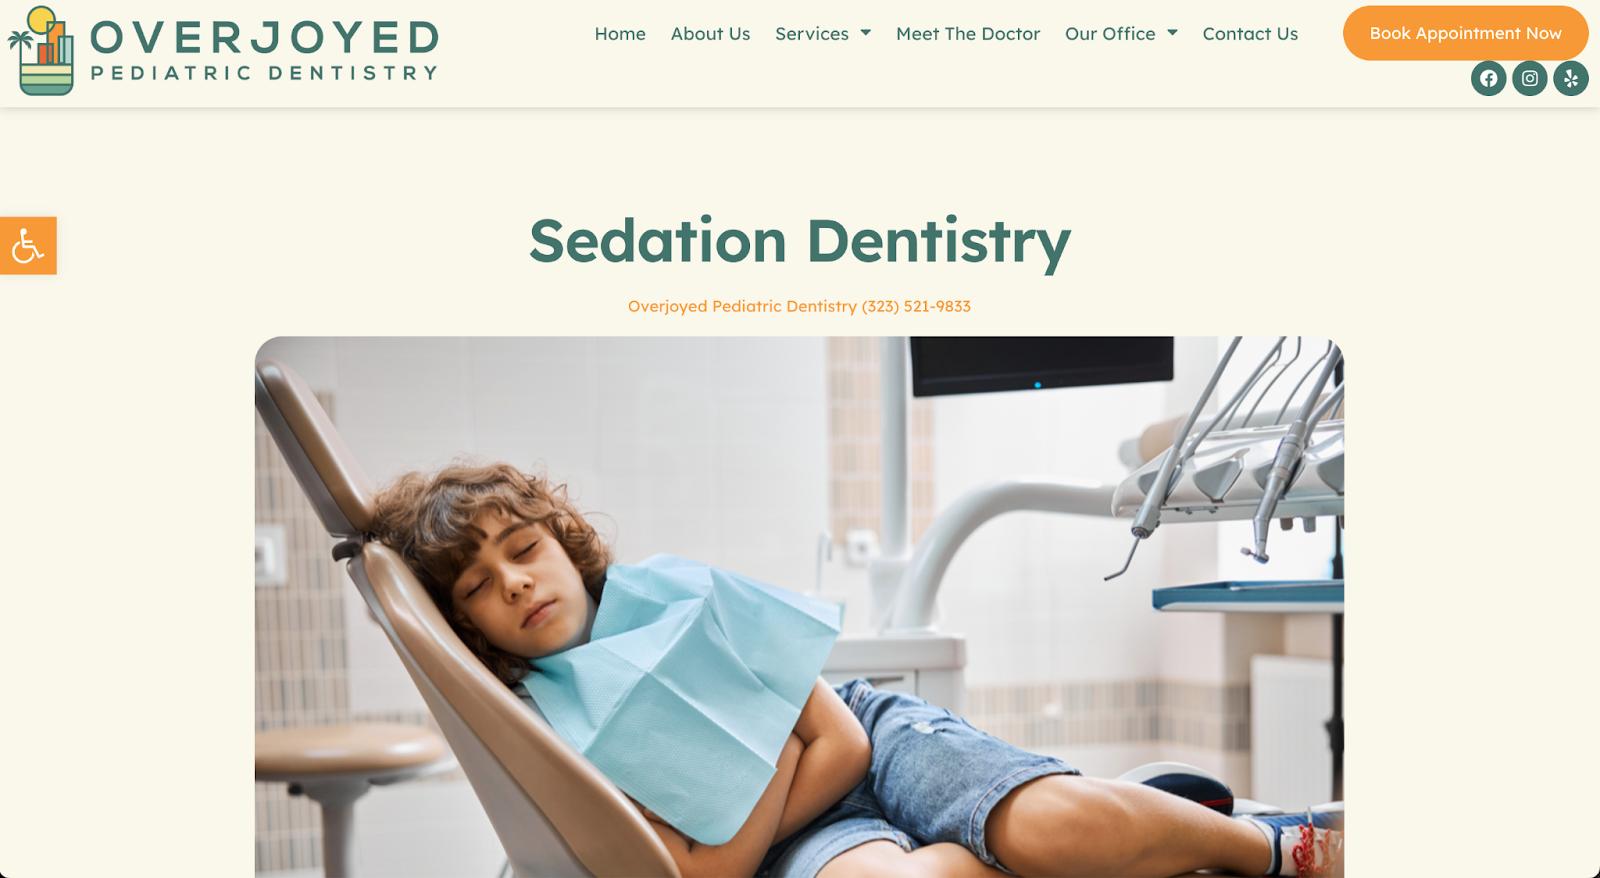 Sedation Dental produced an eye-catching and modern website that any modern dentist would be proud of